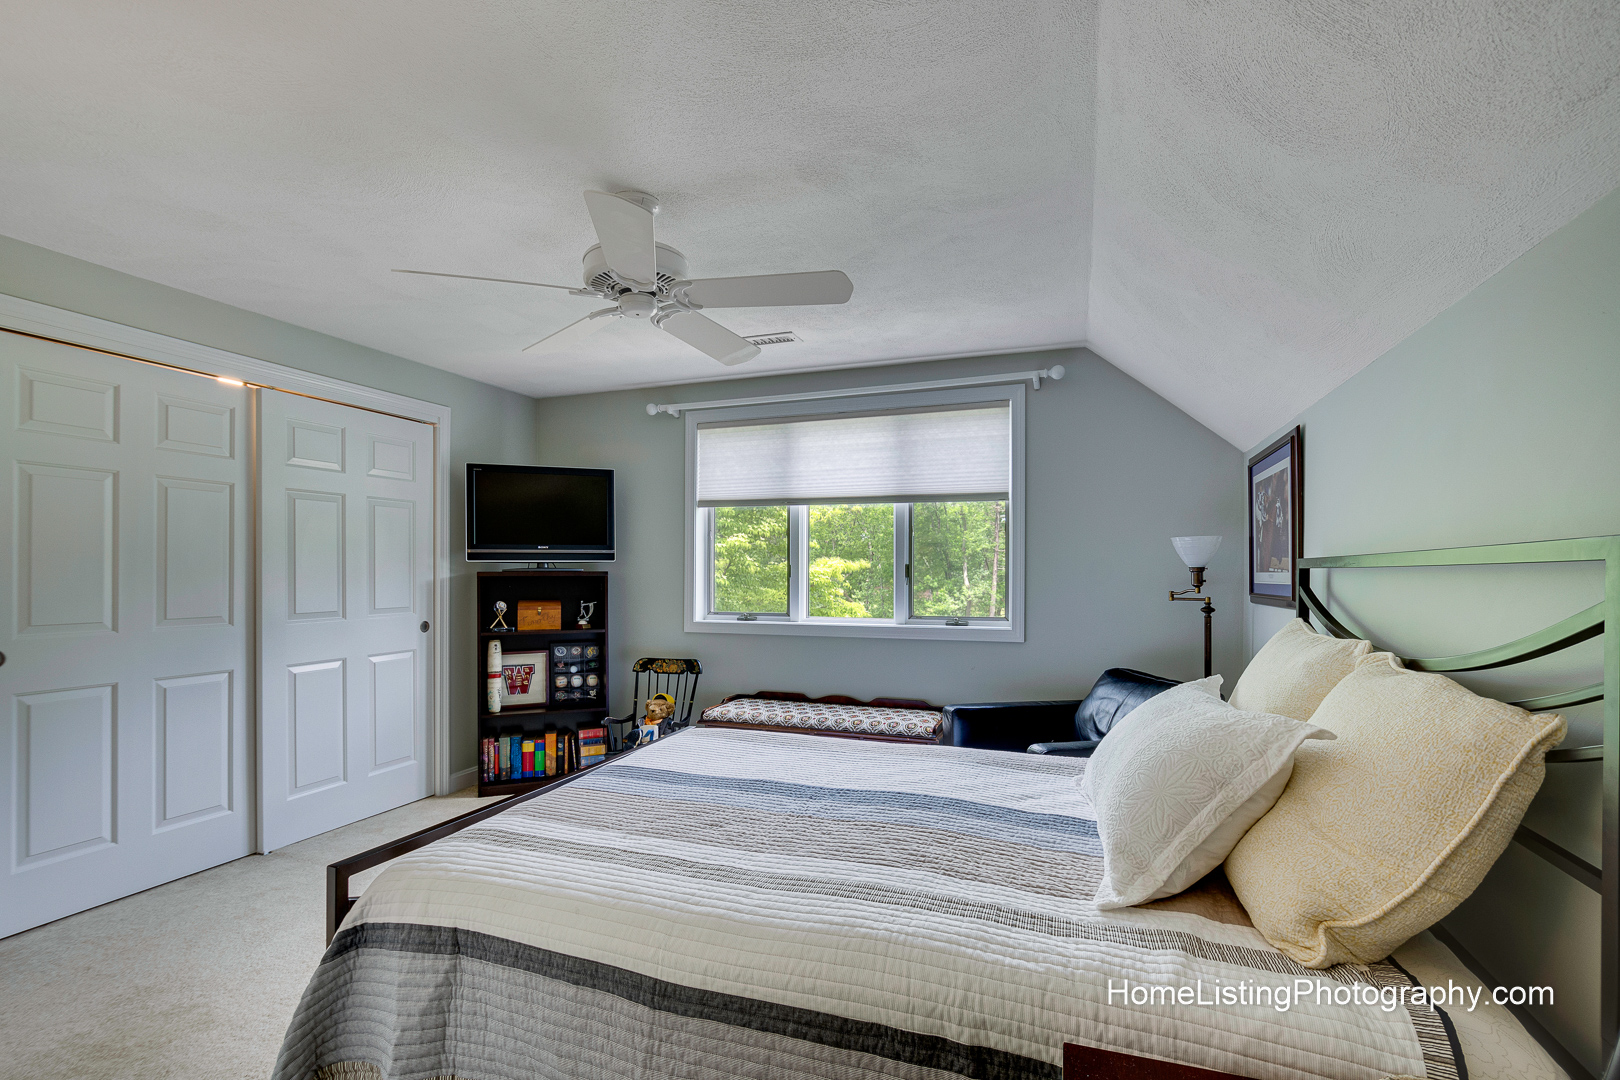 Thomas Adach - North Reading MA professional real estate photographer - 508-655-2225 Home Listing Photography